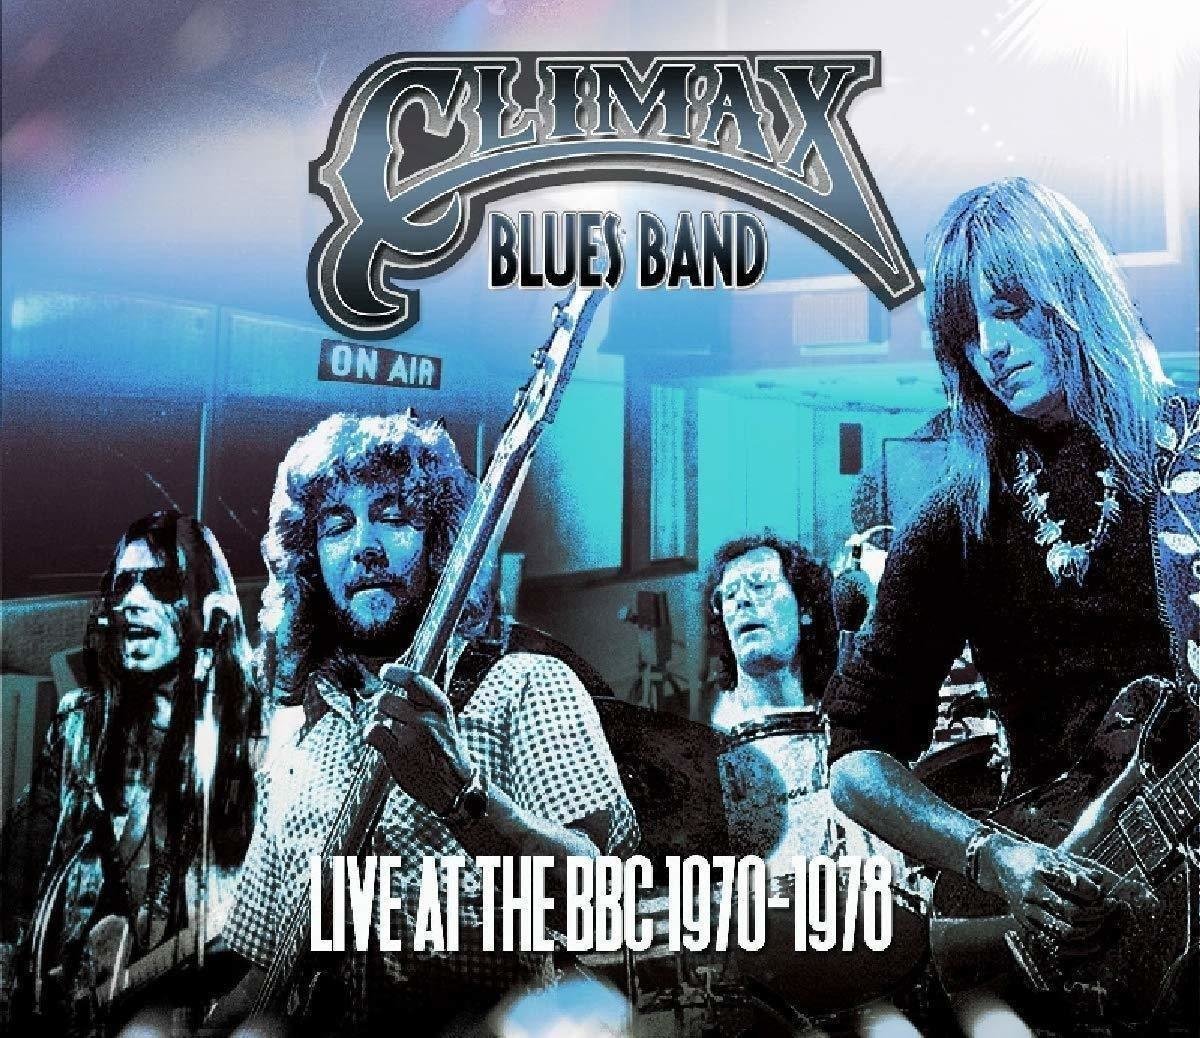 Vinyl Record Climax Blues Band - Live At The BBC (1970-1978) (Remastered) (2 LP)